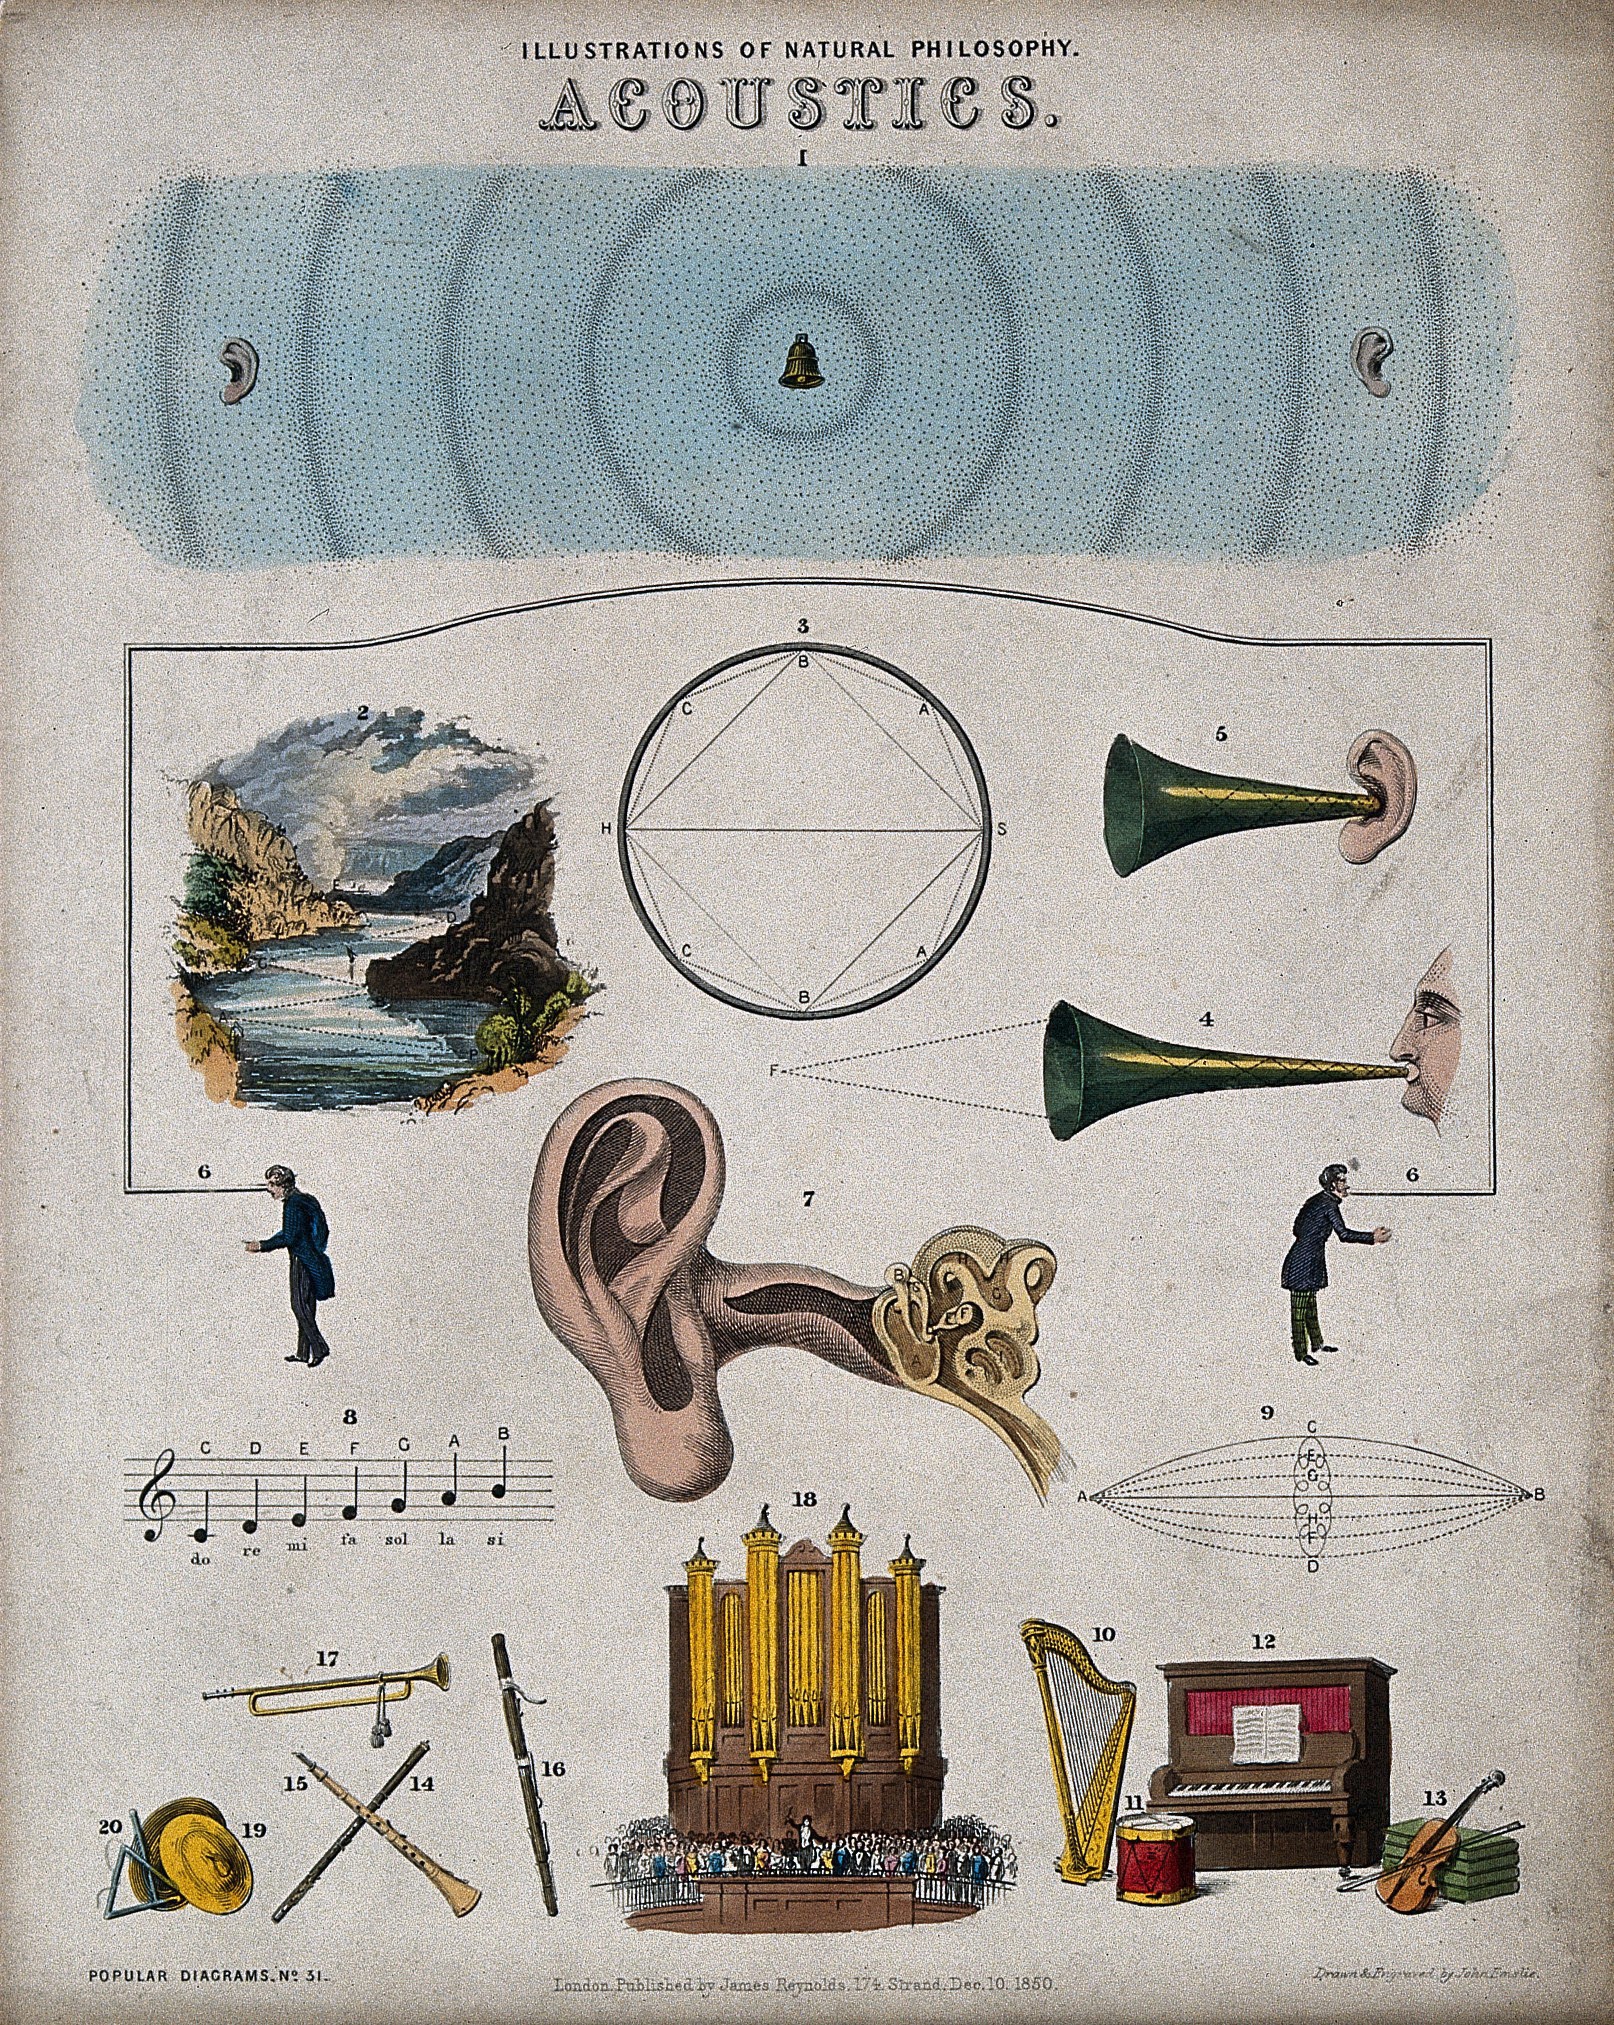 an illustration showing ears, listening horns, organs, instruments and notation